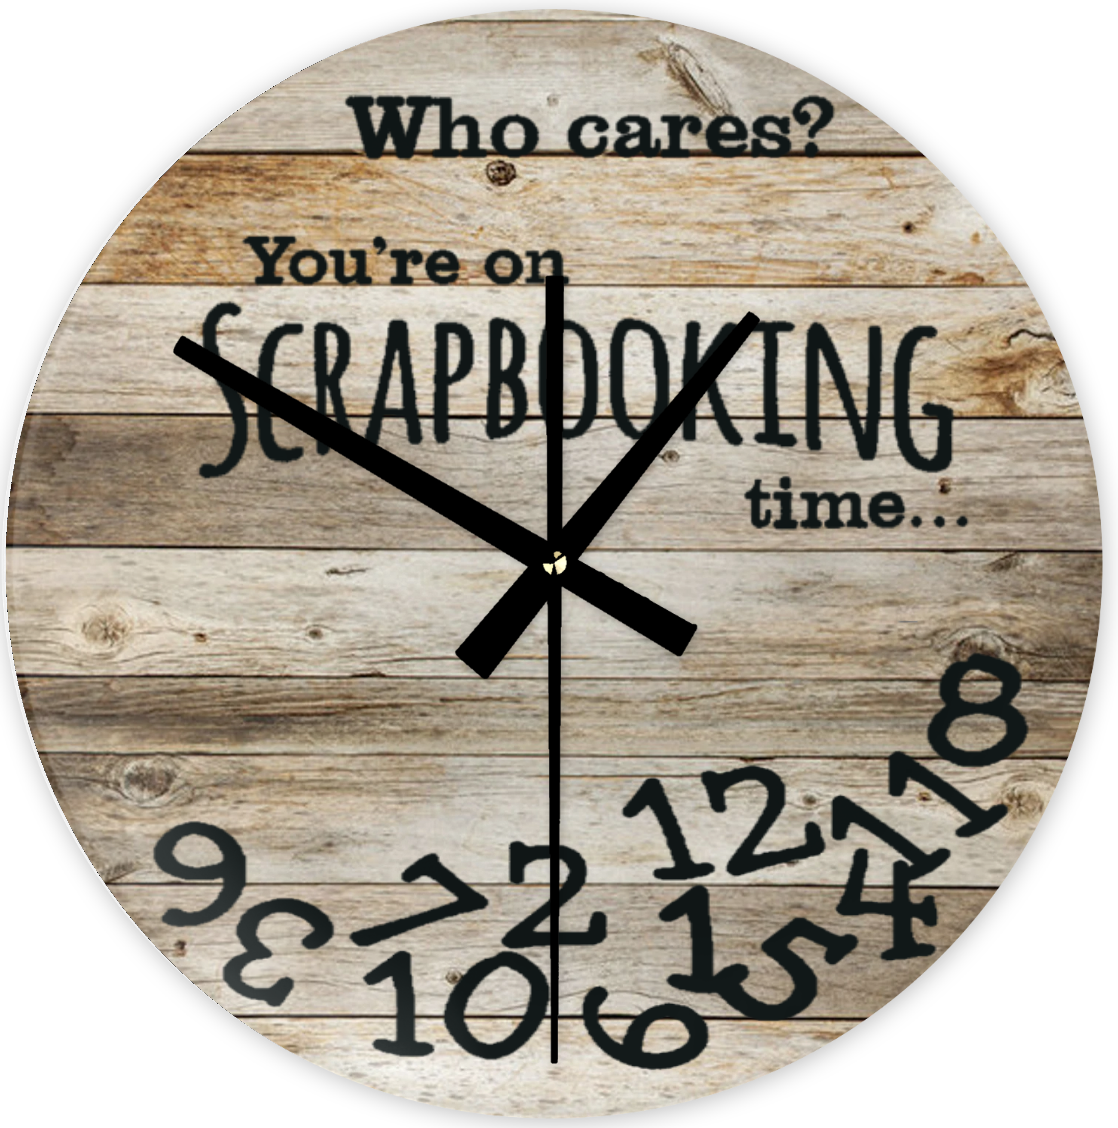 Crafting Clock: WHO CARES? YOU'RE ON SCRAPBOOKING TIME